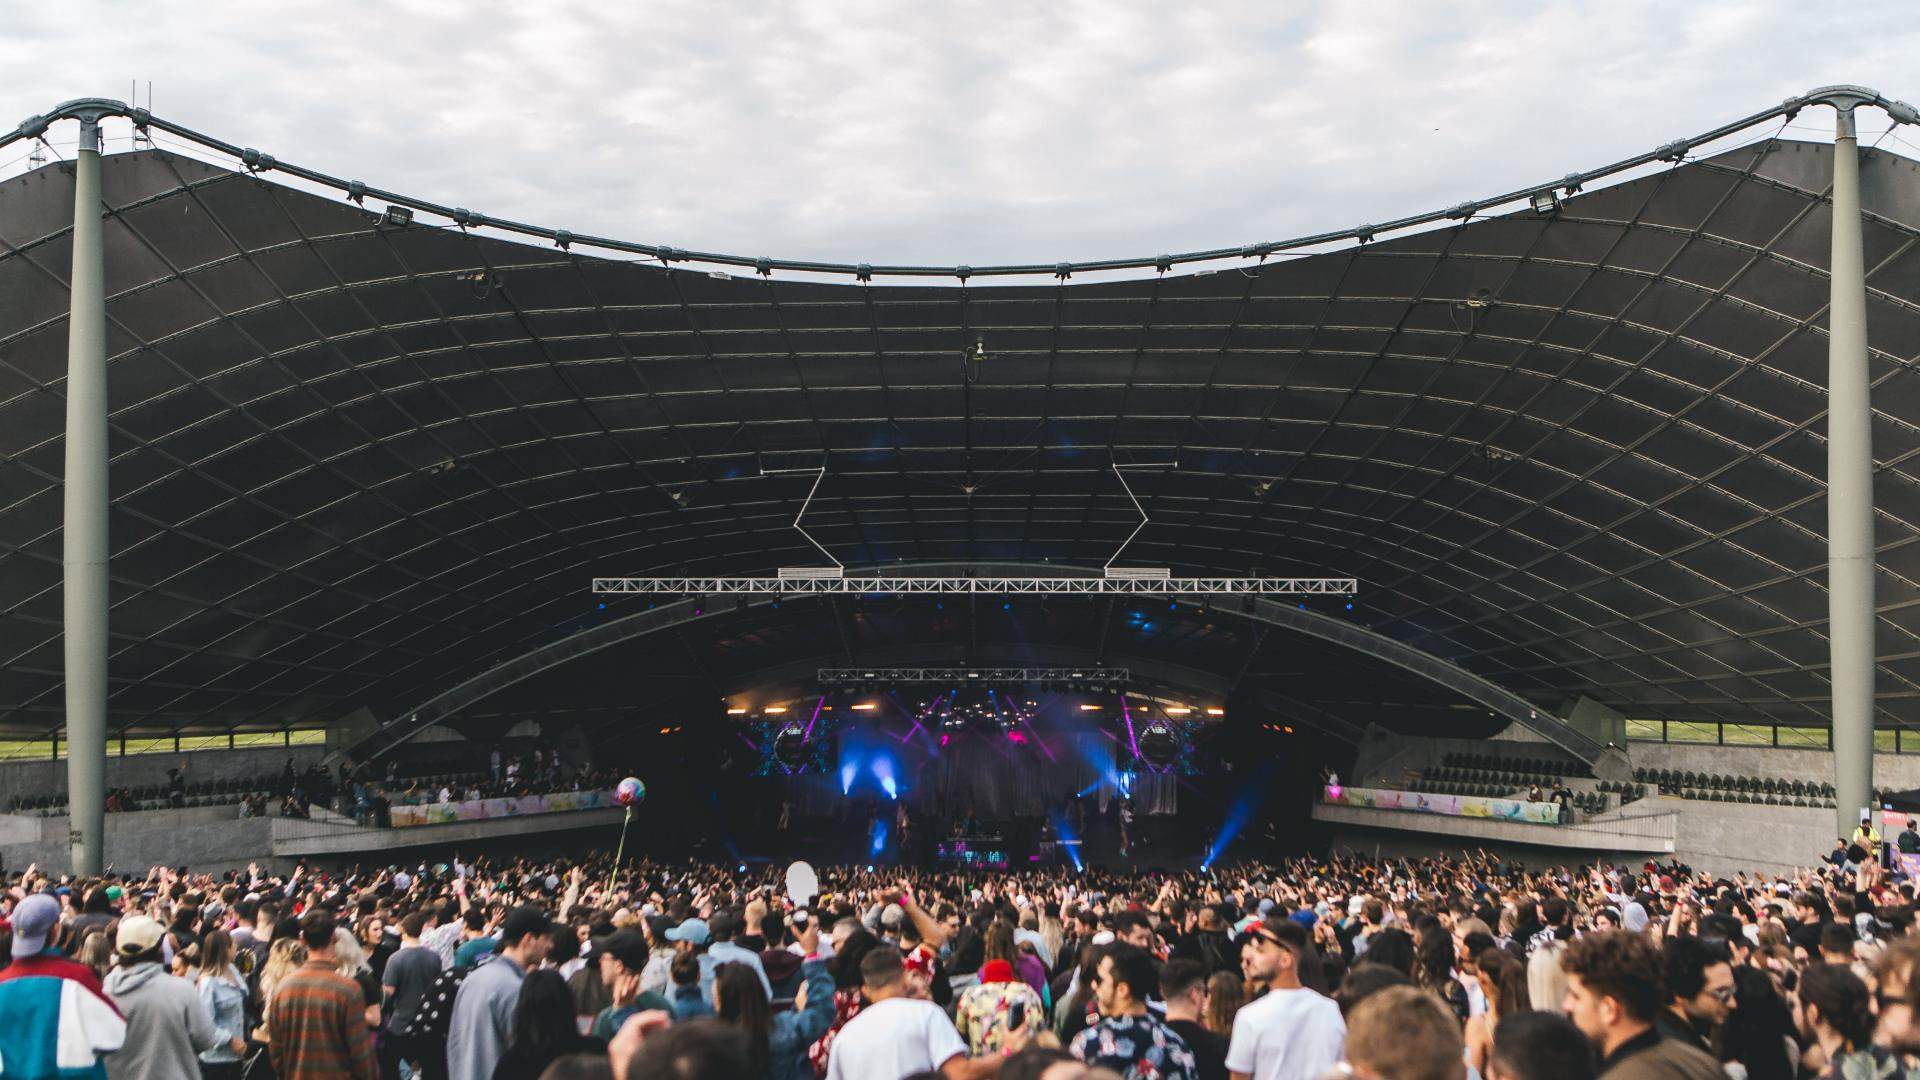 The Sidney Myer Music Bowl Is Hosting a Live Gig This Month to Test Melbourne's Reopening Settings